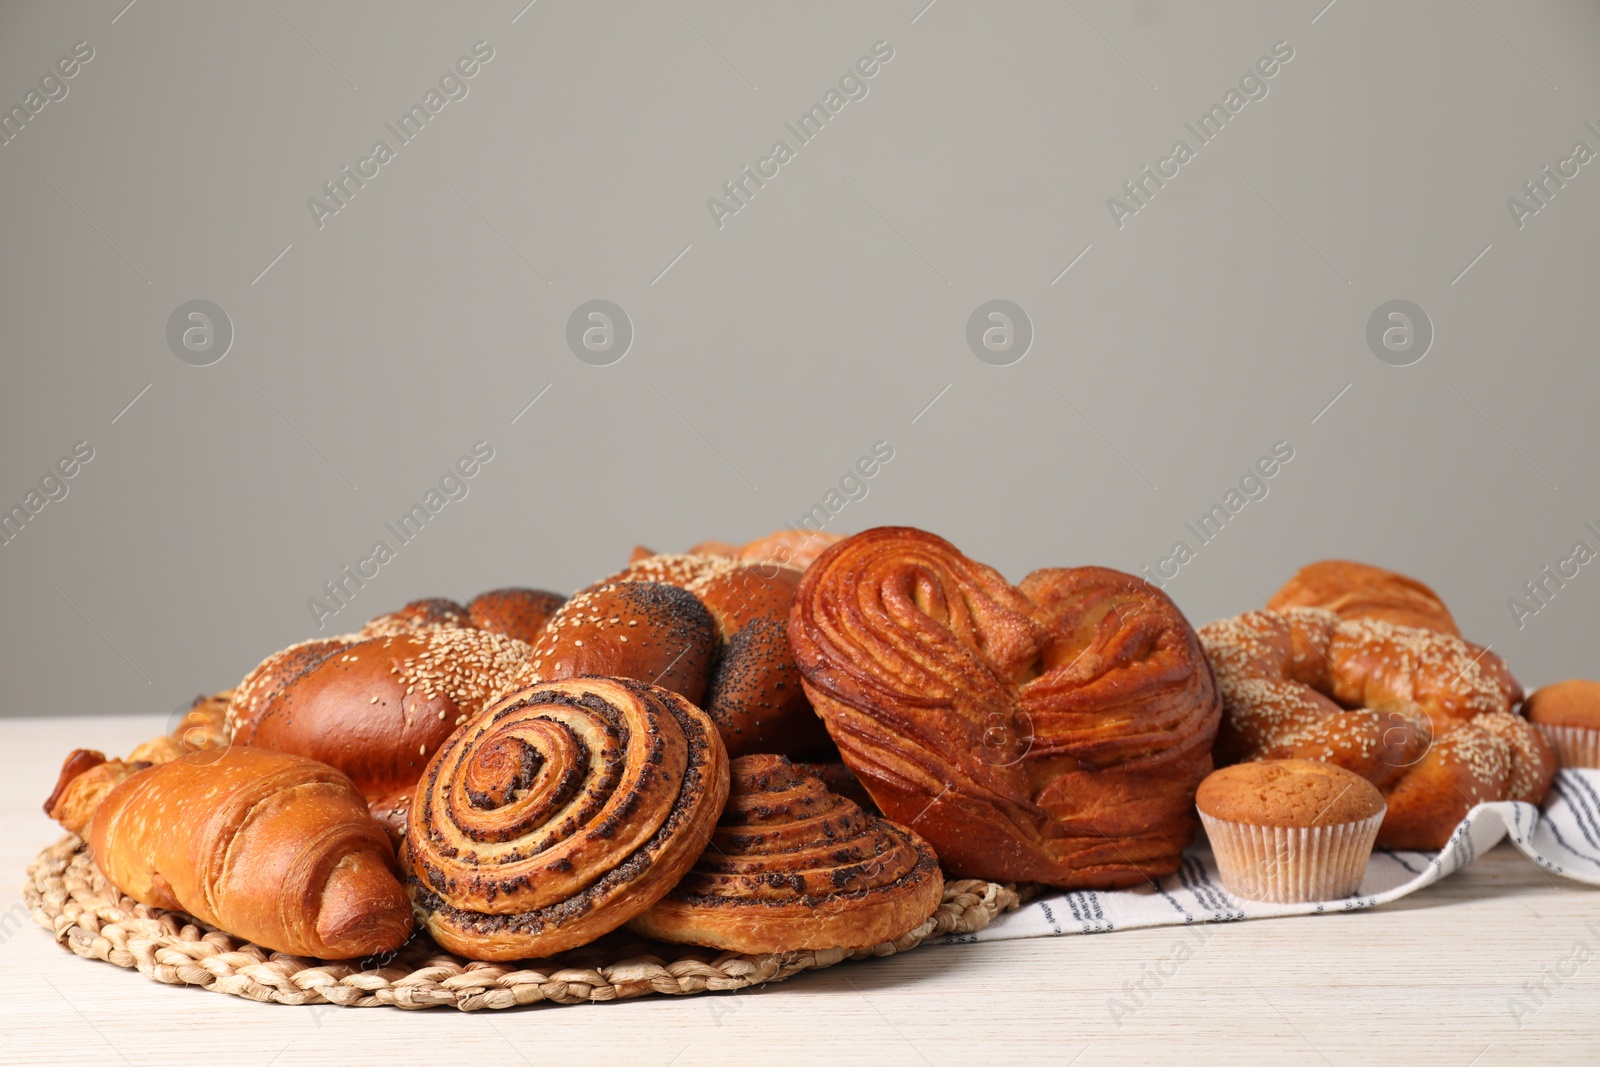 Photo of Different tasty freshly baked pastries on white wooden table